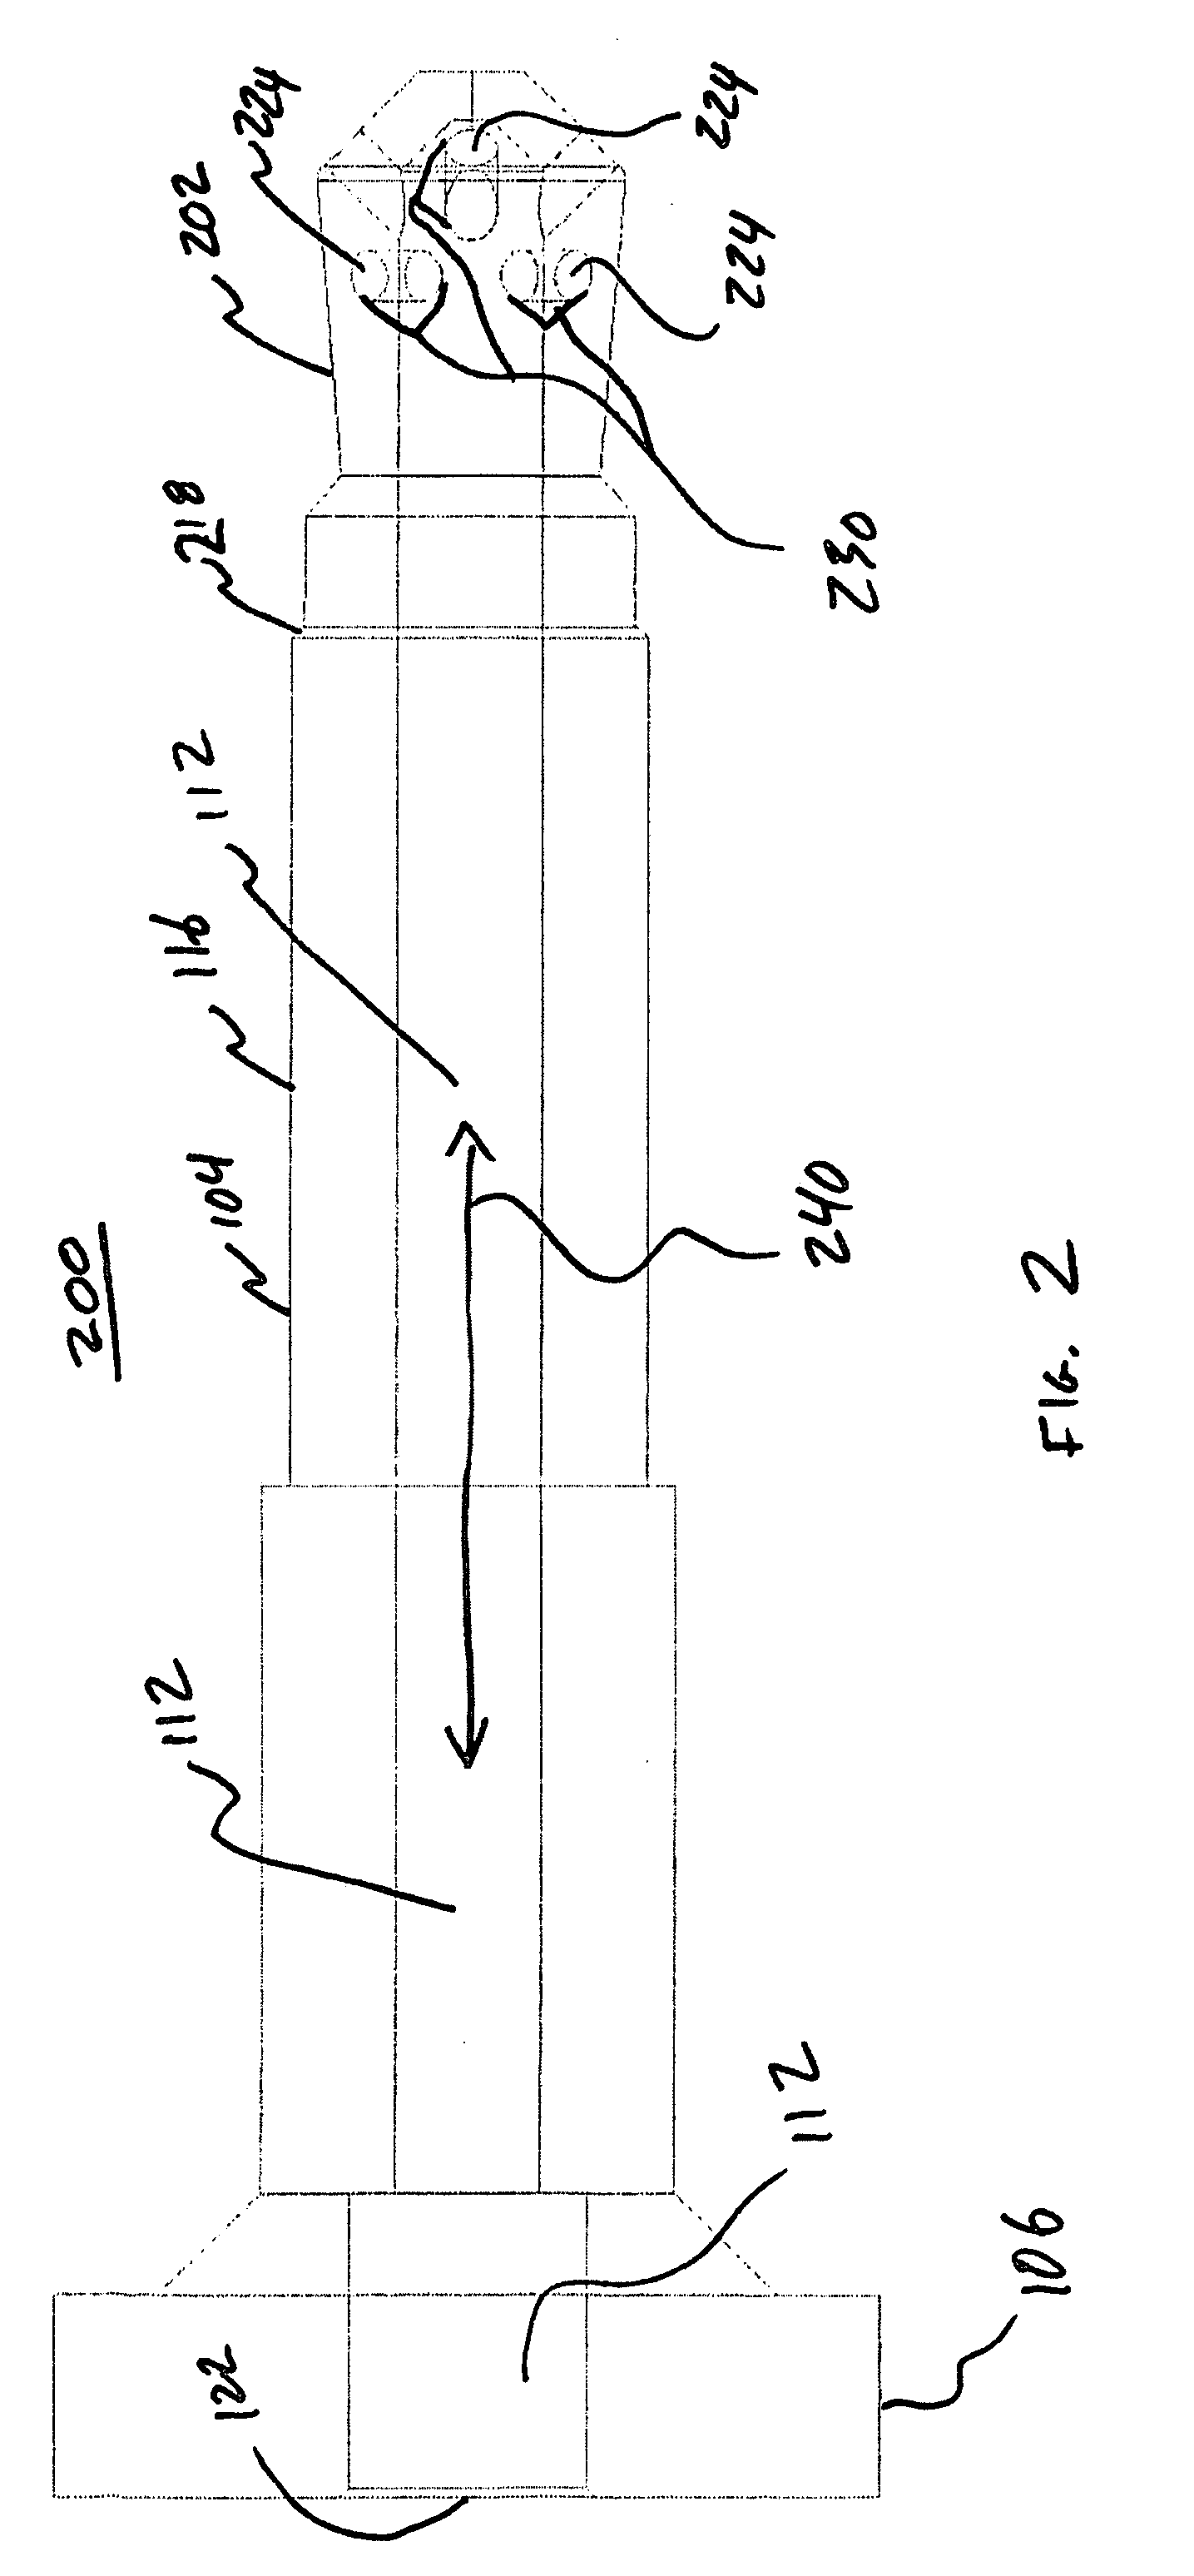 Apparatus and method for cleaning electronic jacks of debris